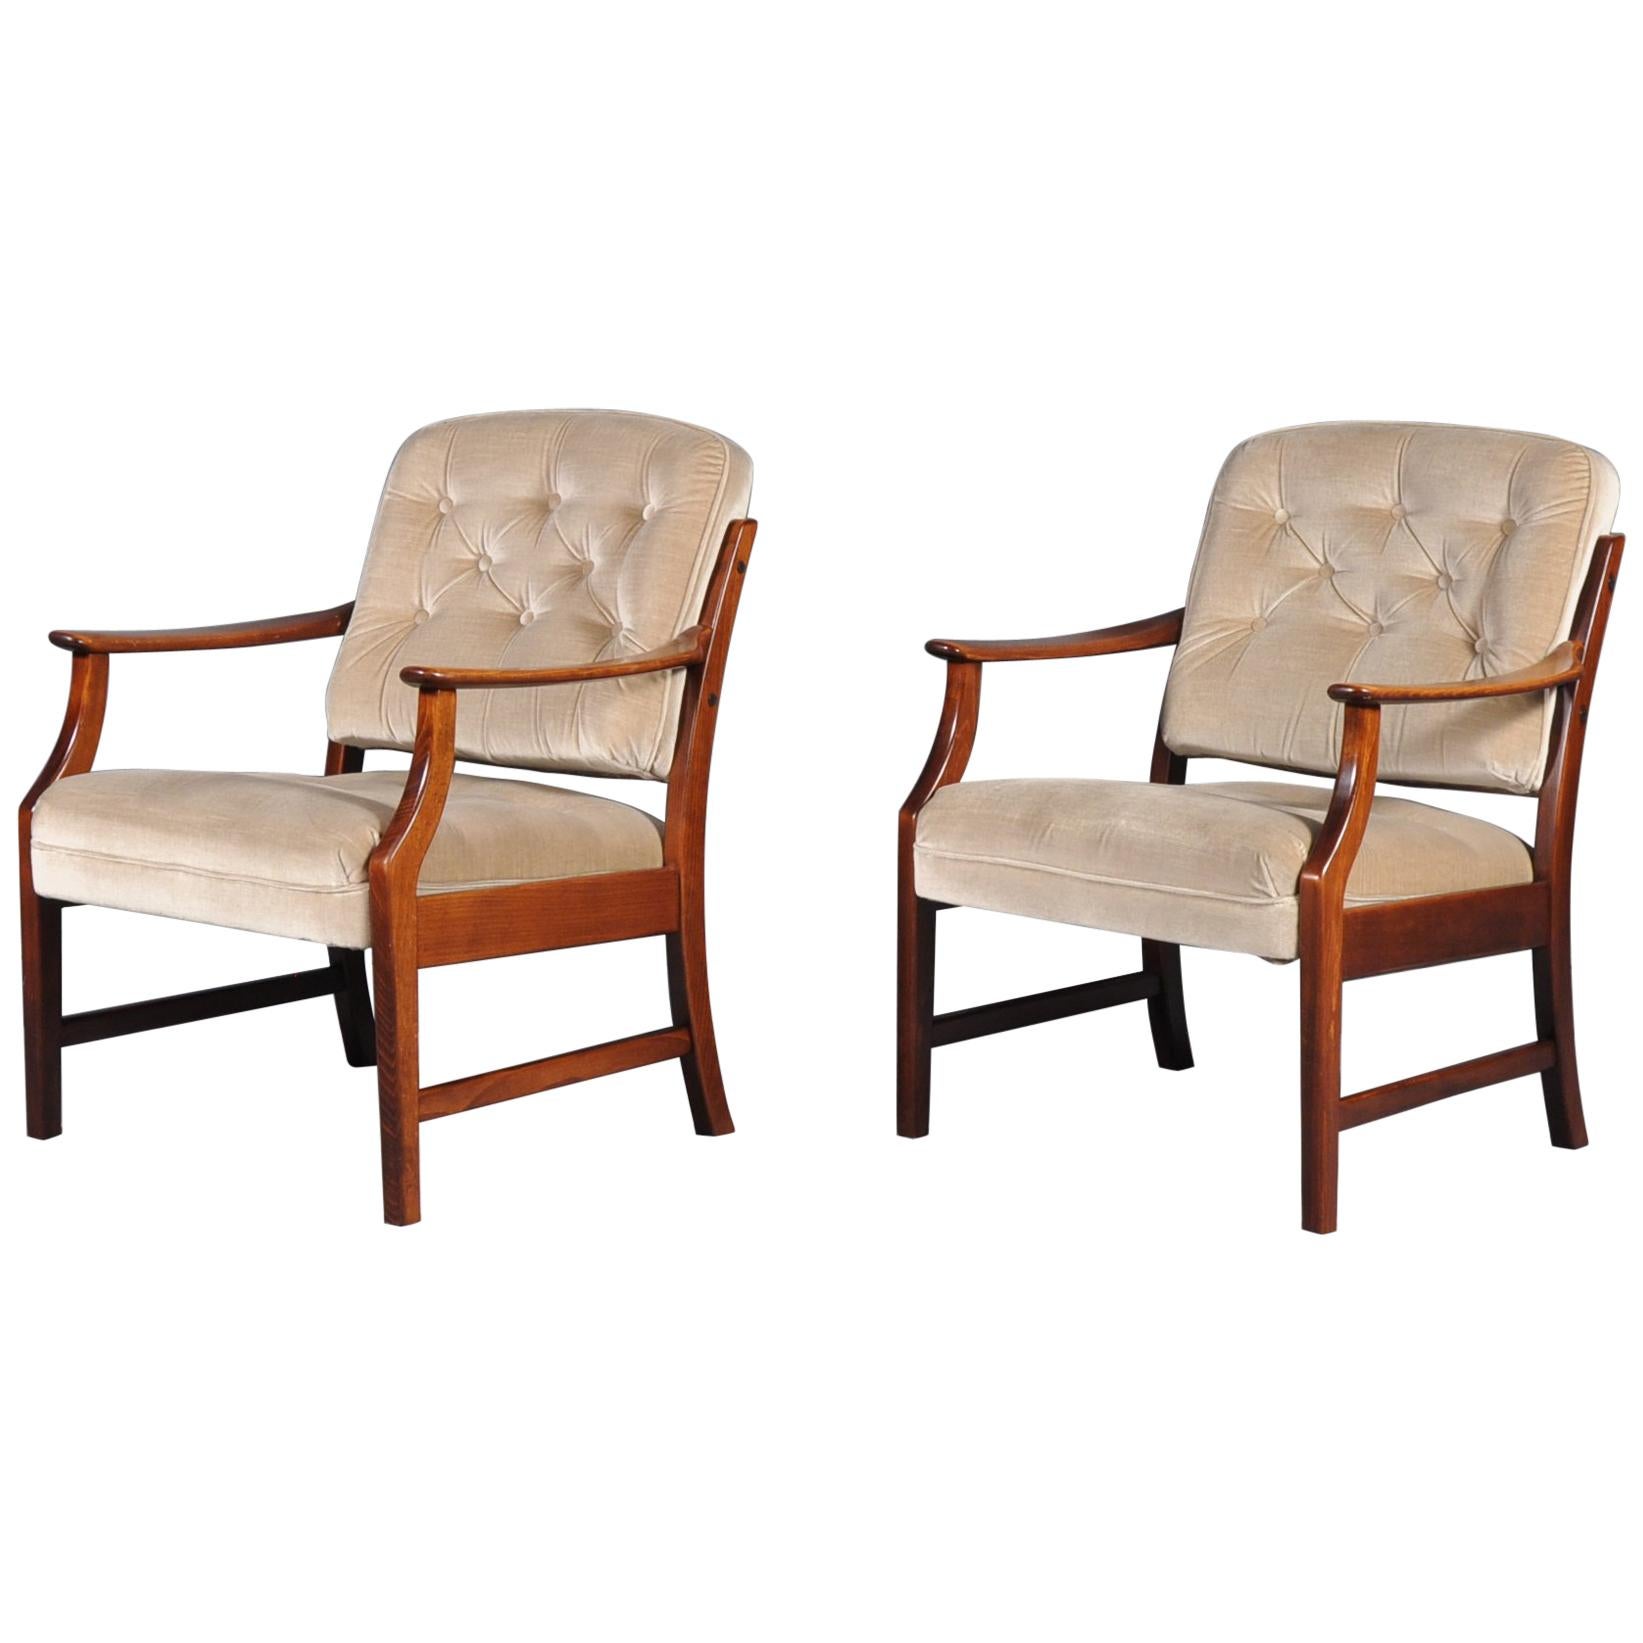 Pair of Two Danish Midcentury Modern Arm Dining Chairs, 1960s For Sale